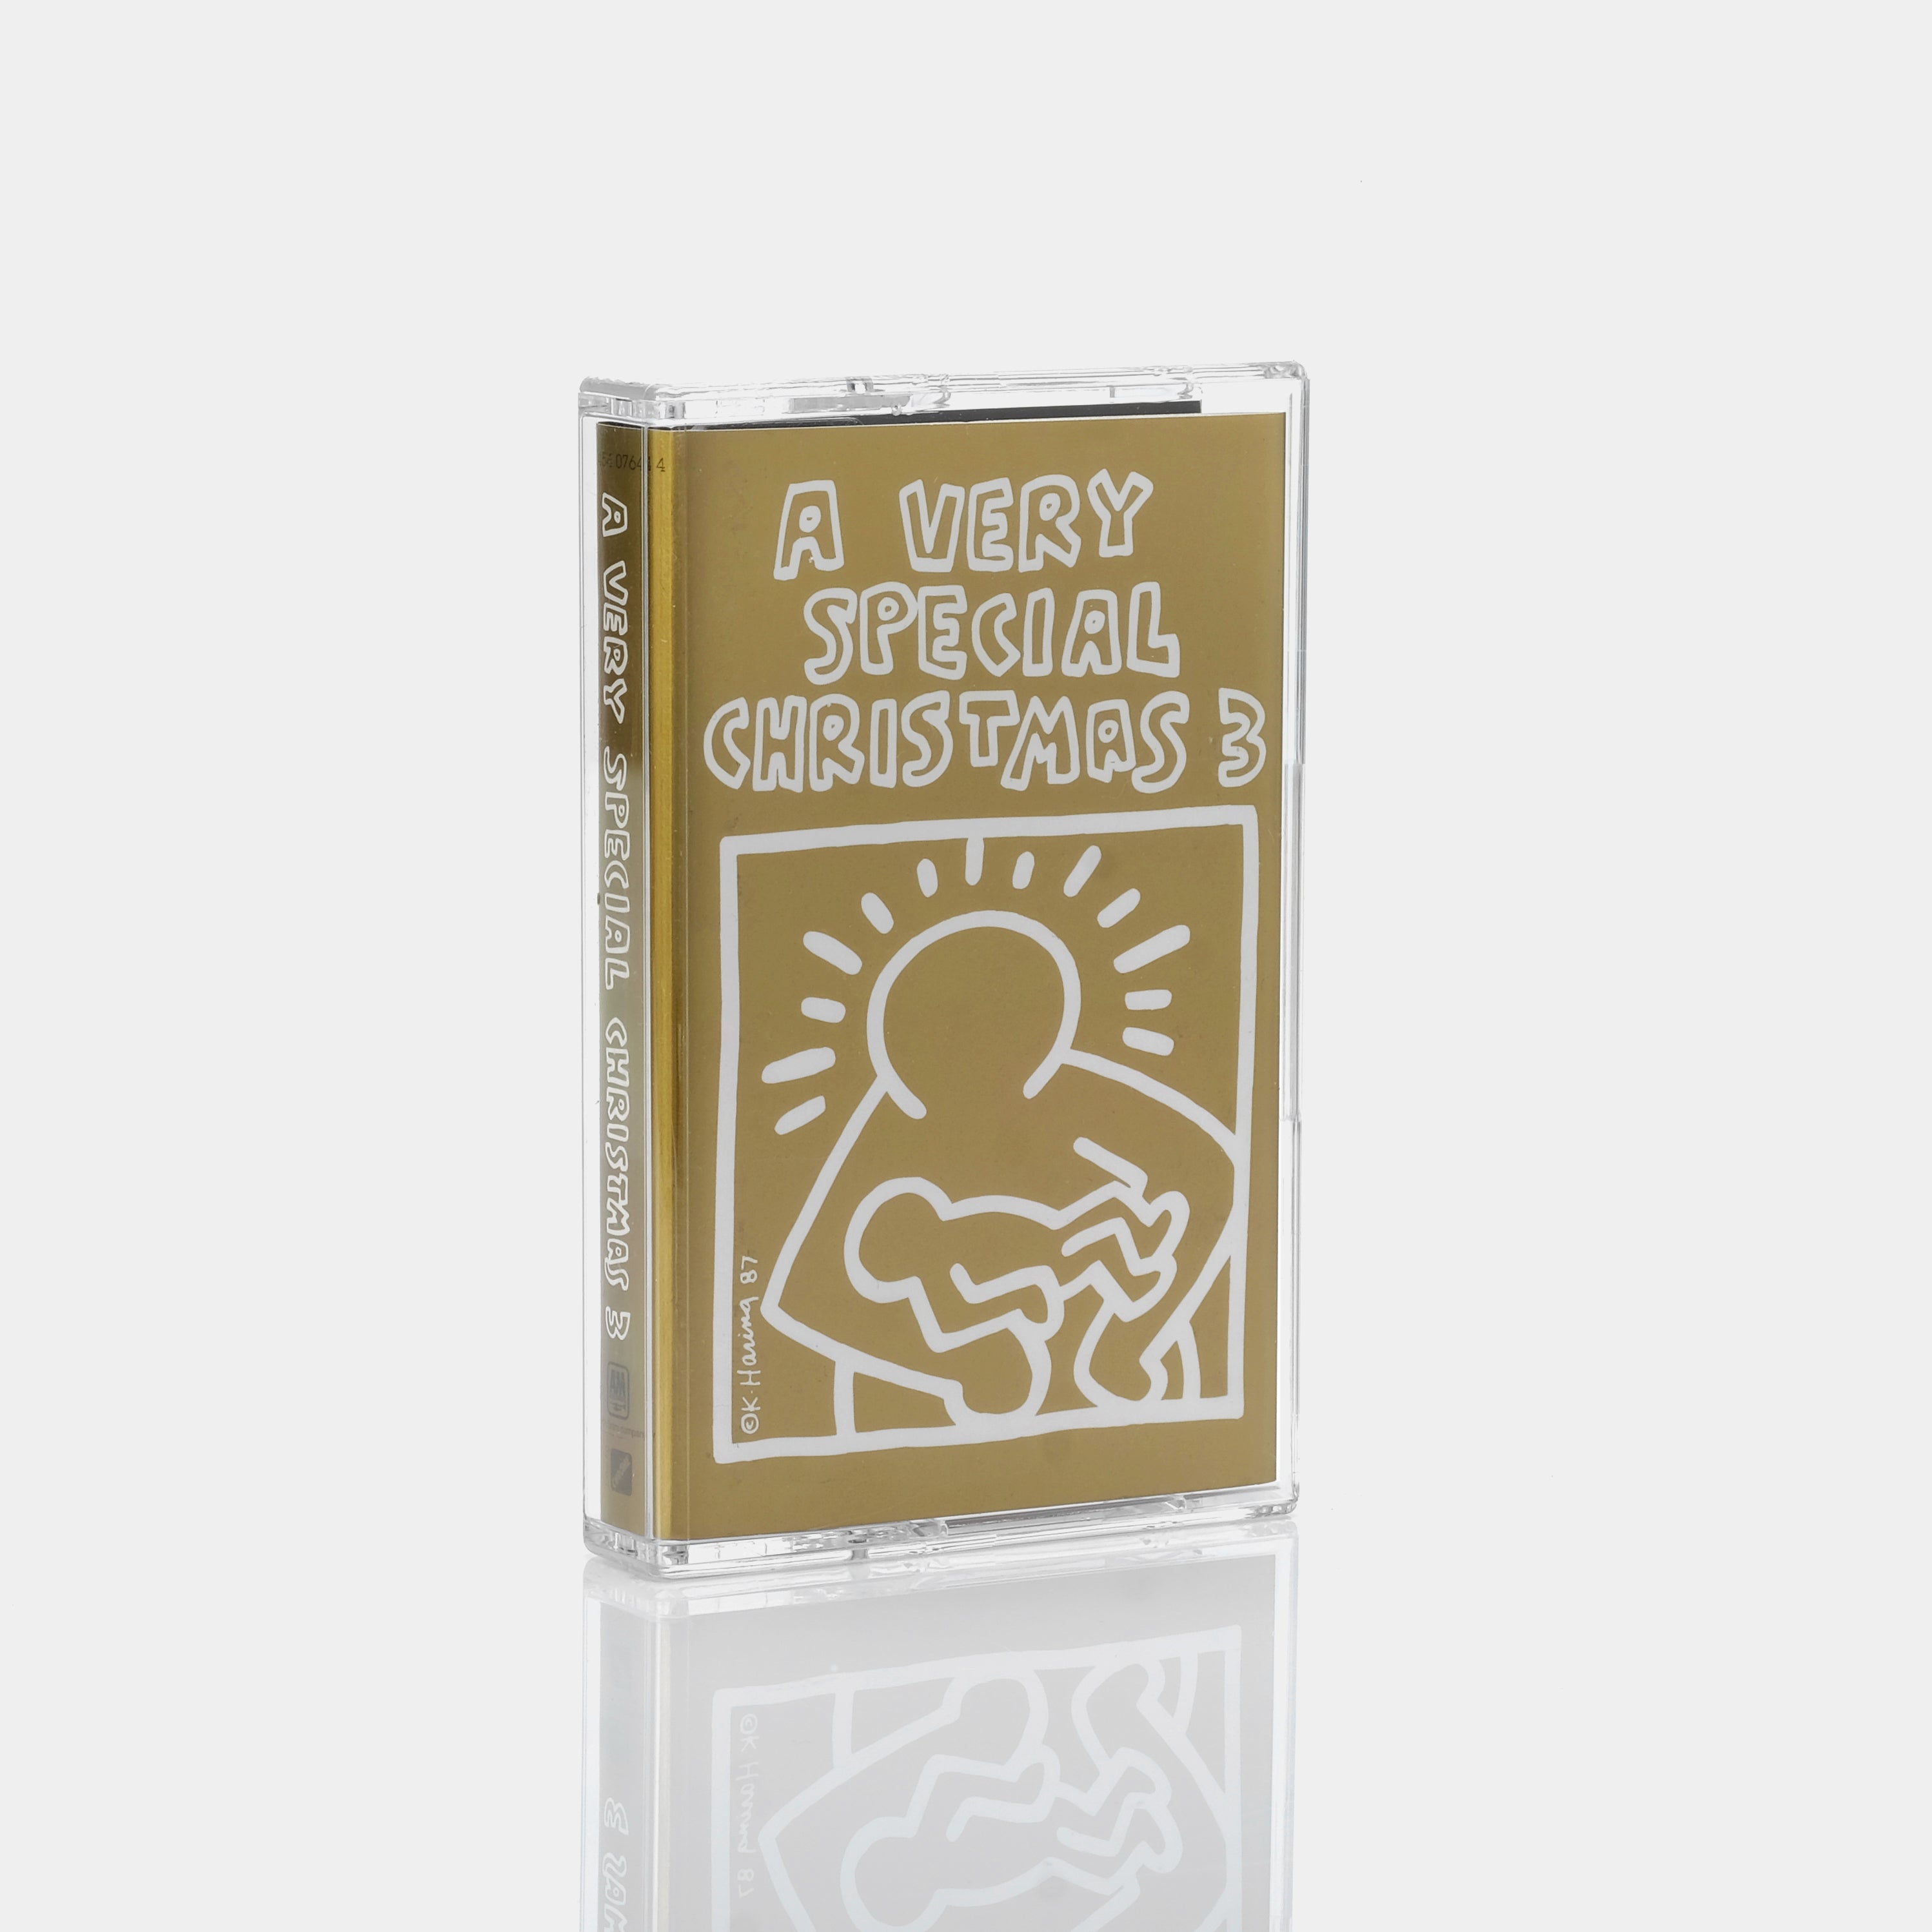 A Very Special Christmas 3 Cassette Tape